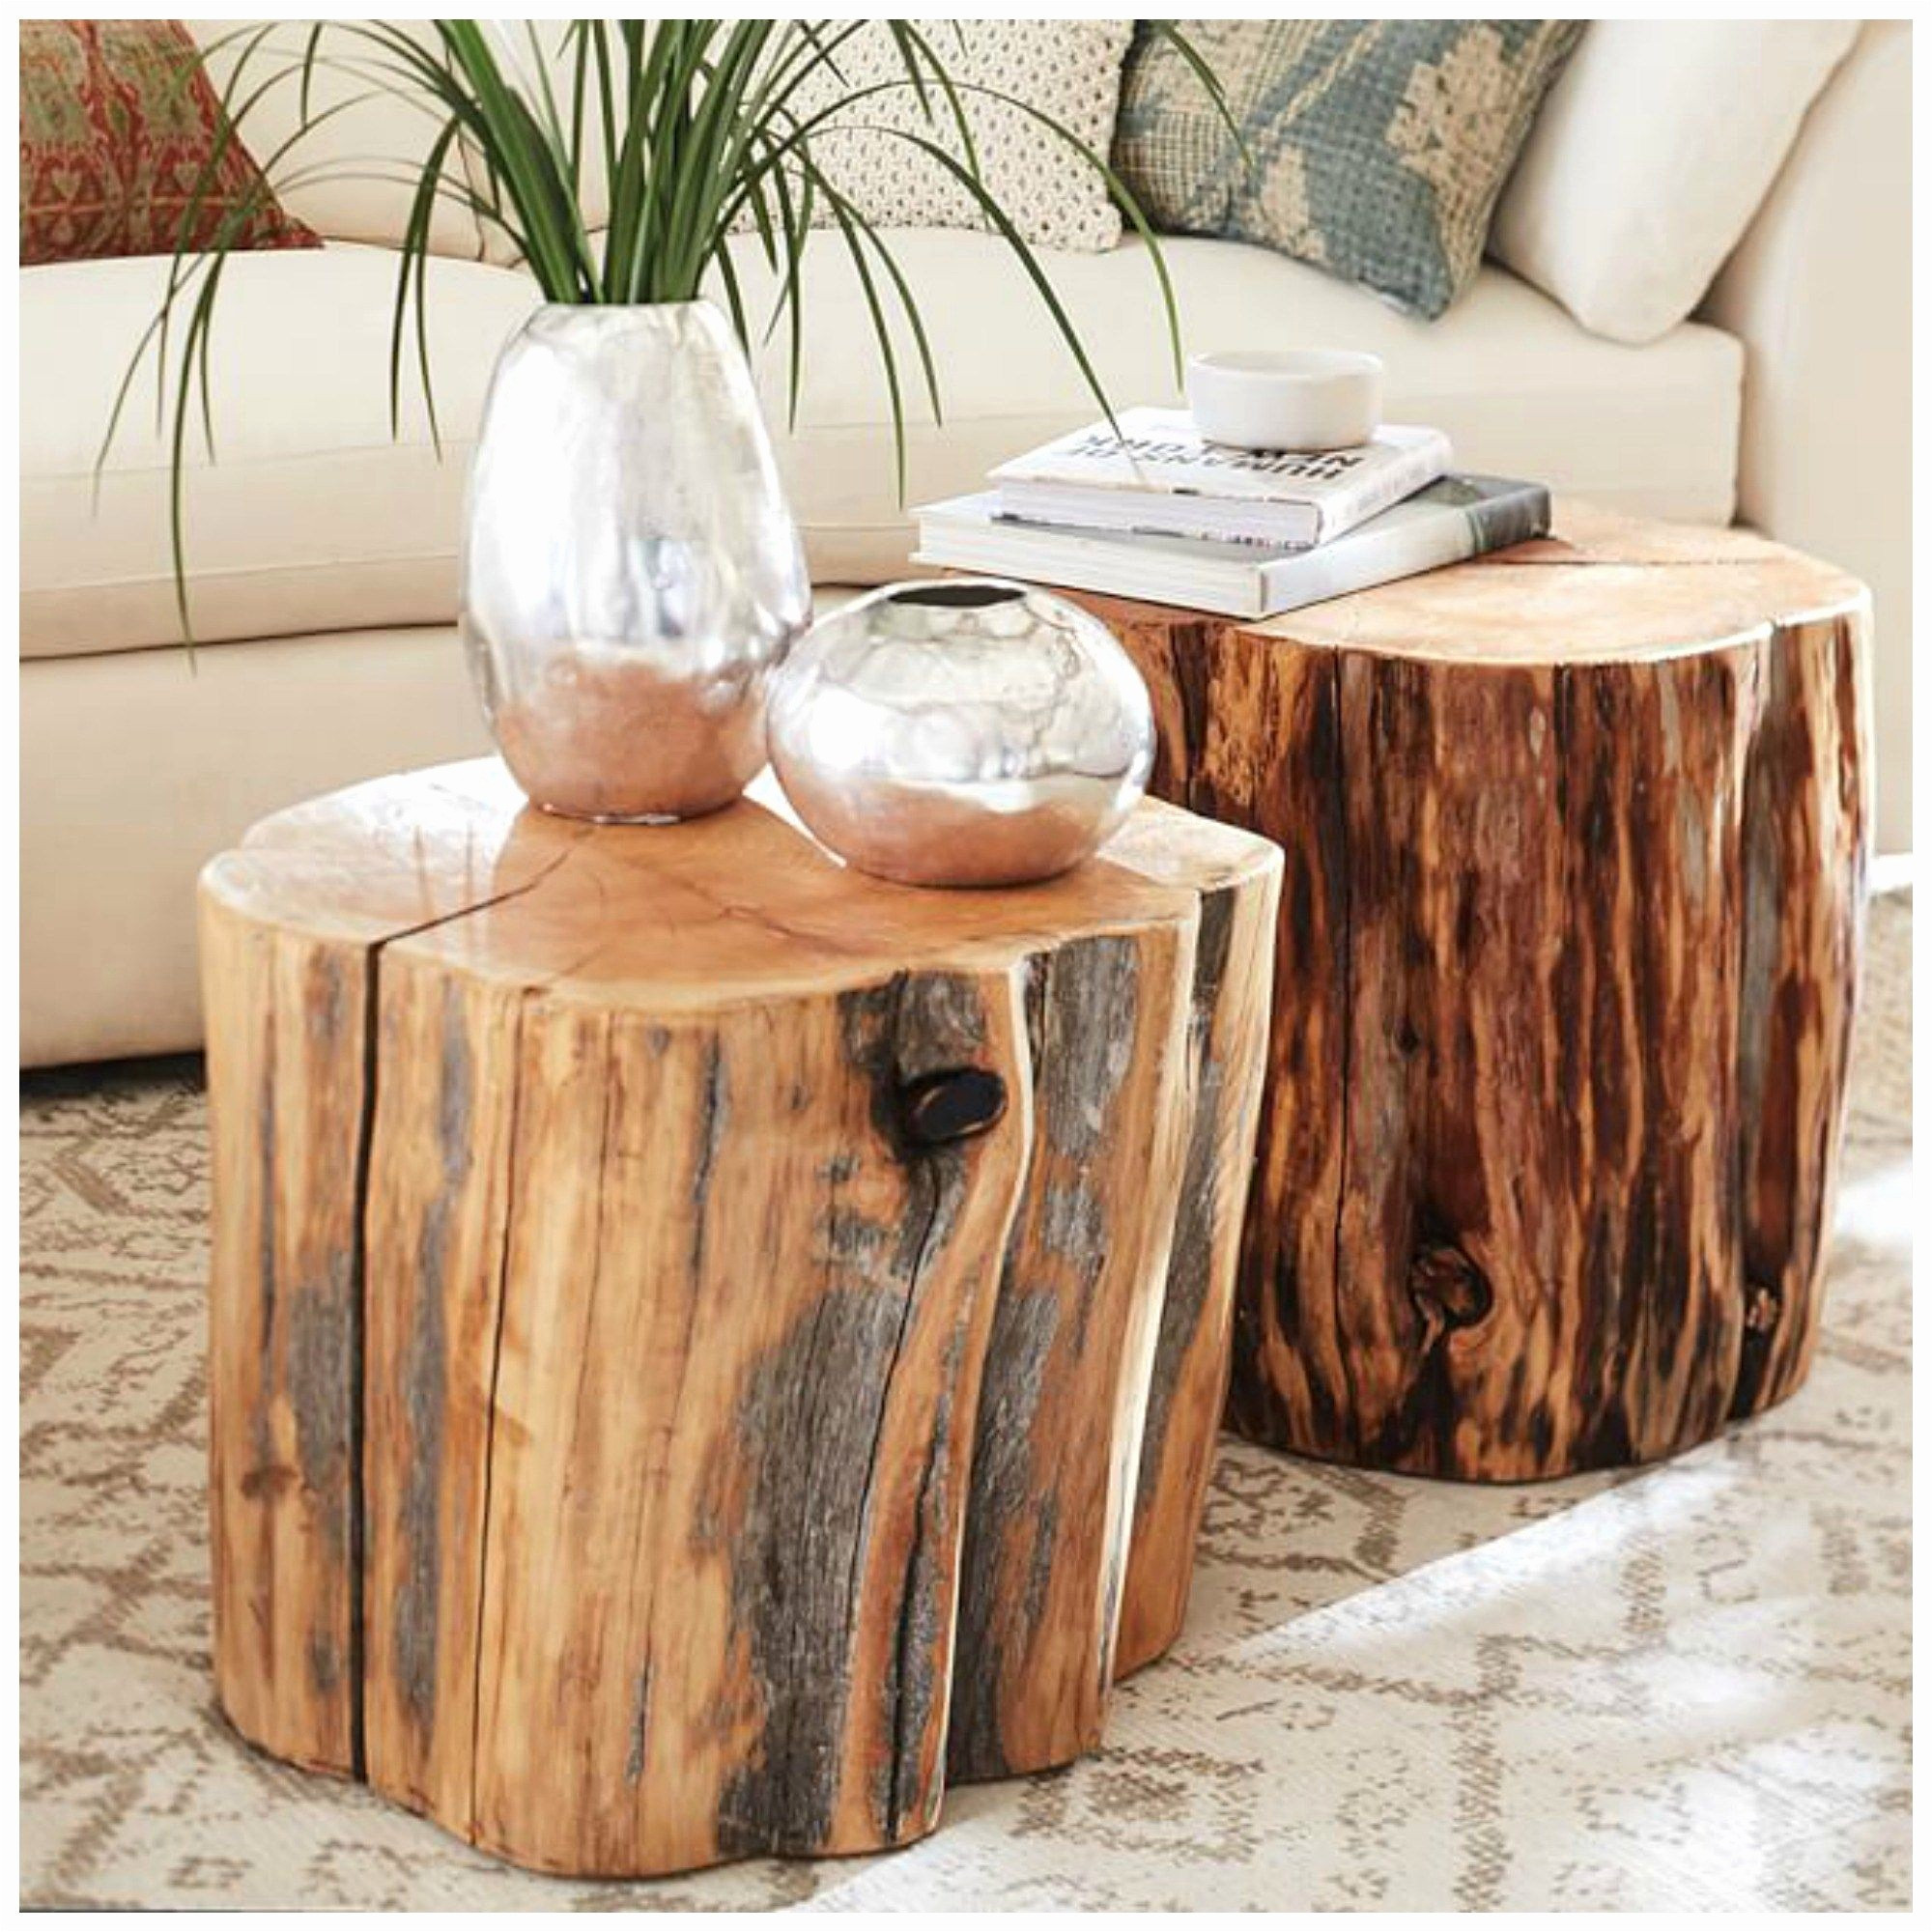 13 Stunning 6 Cylinder Vase 2024 free download 6 cylinder vase of tree stump chair luxury wood stump table 71h vases tree stump vase pertaining to tree stump chair best of tree trunk table lamp awesome wood stump table style reclaimed wo